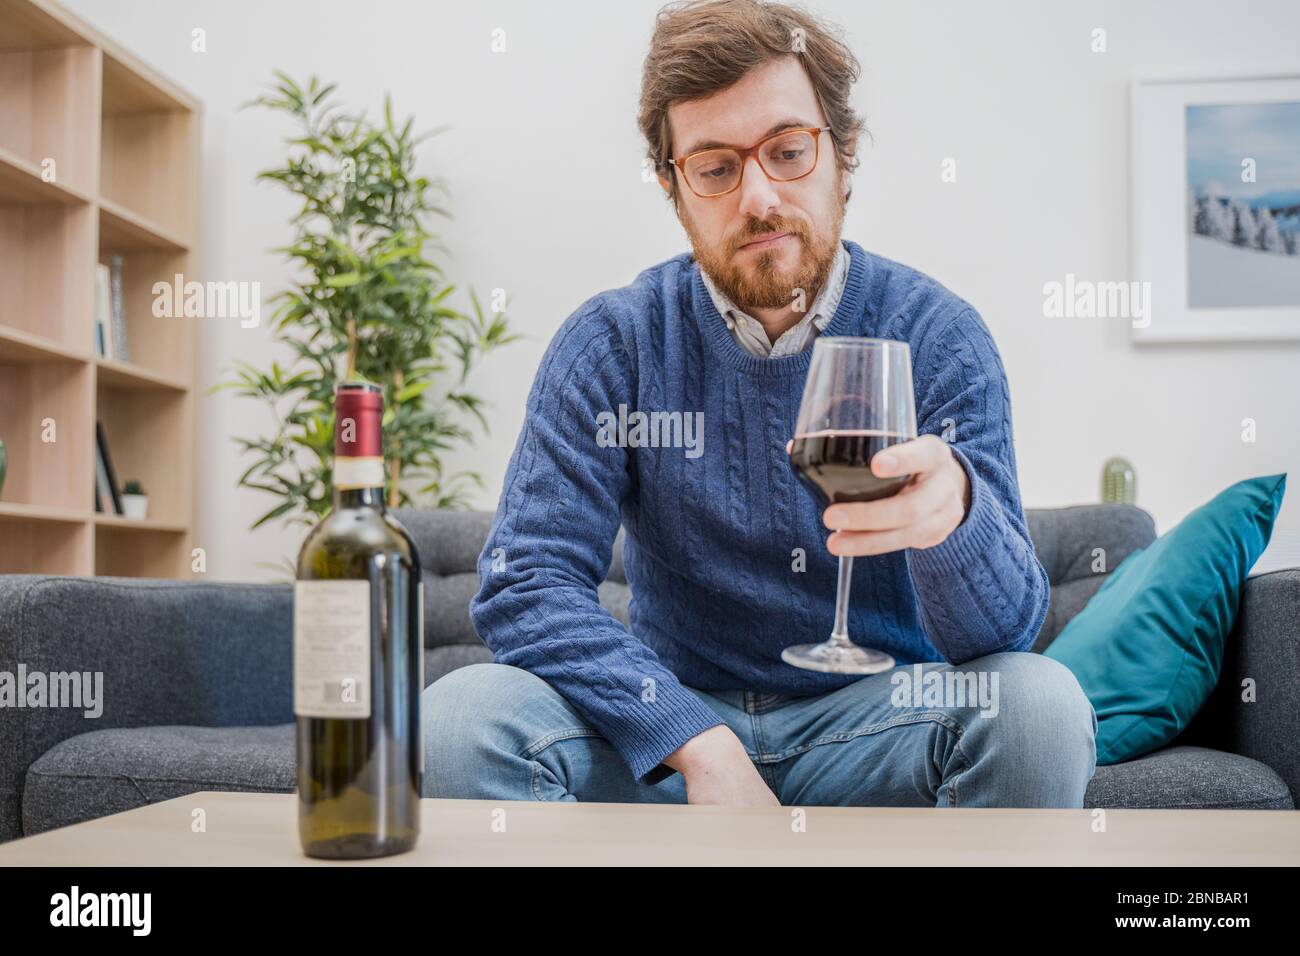 Portrait of man with alcohol drink sitting on sofa at home Stock Photo